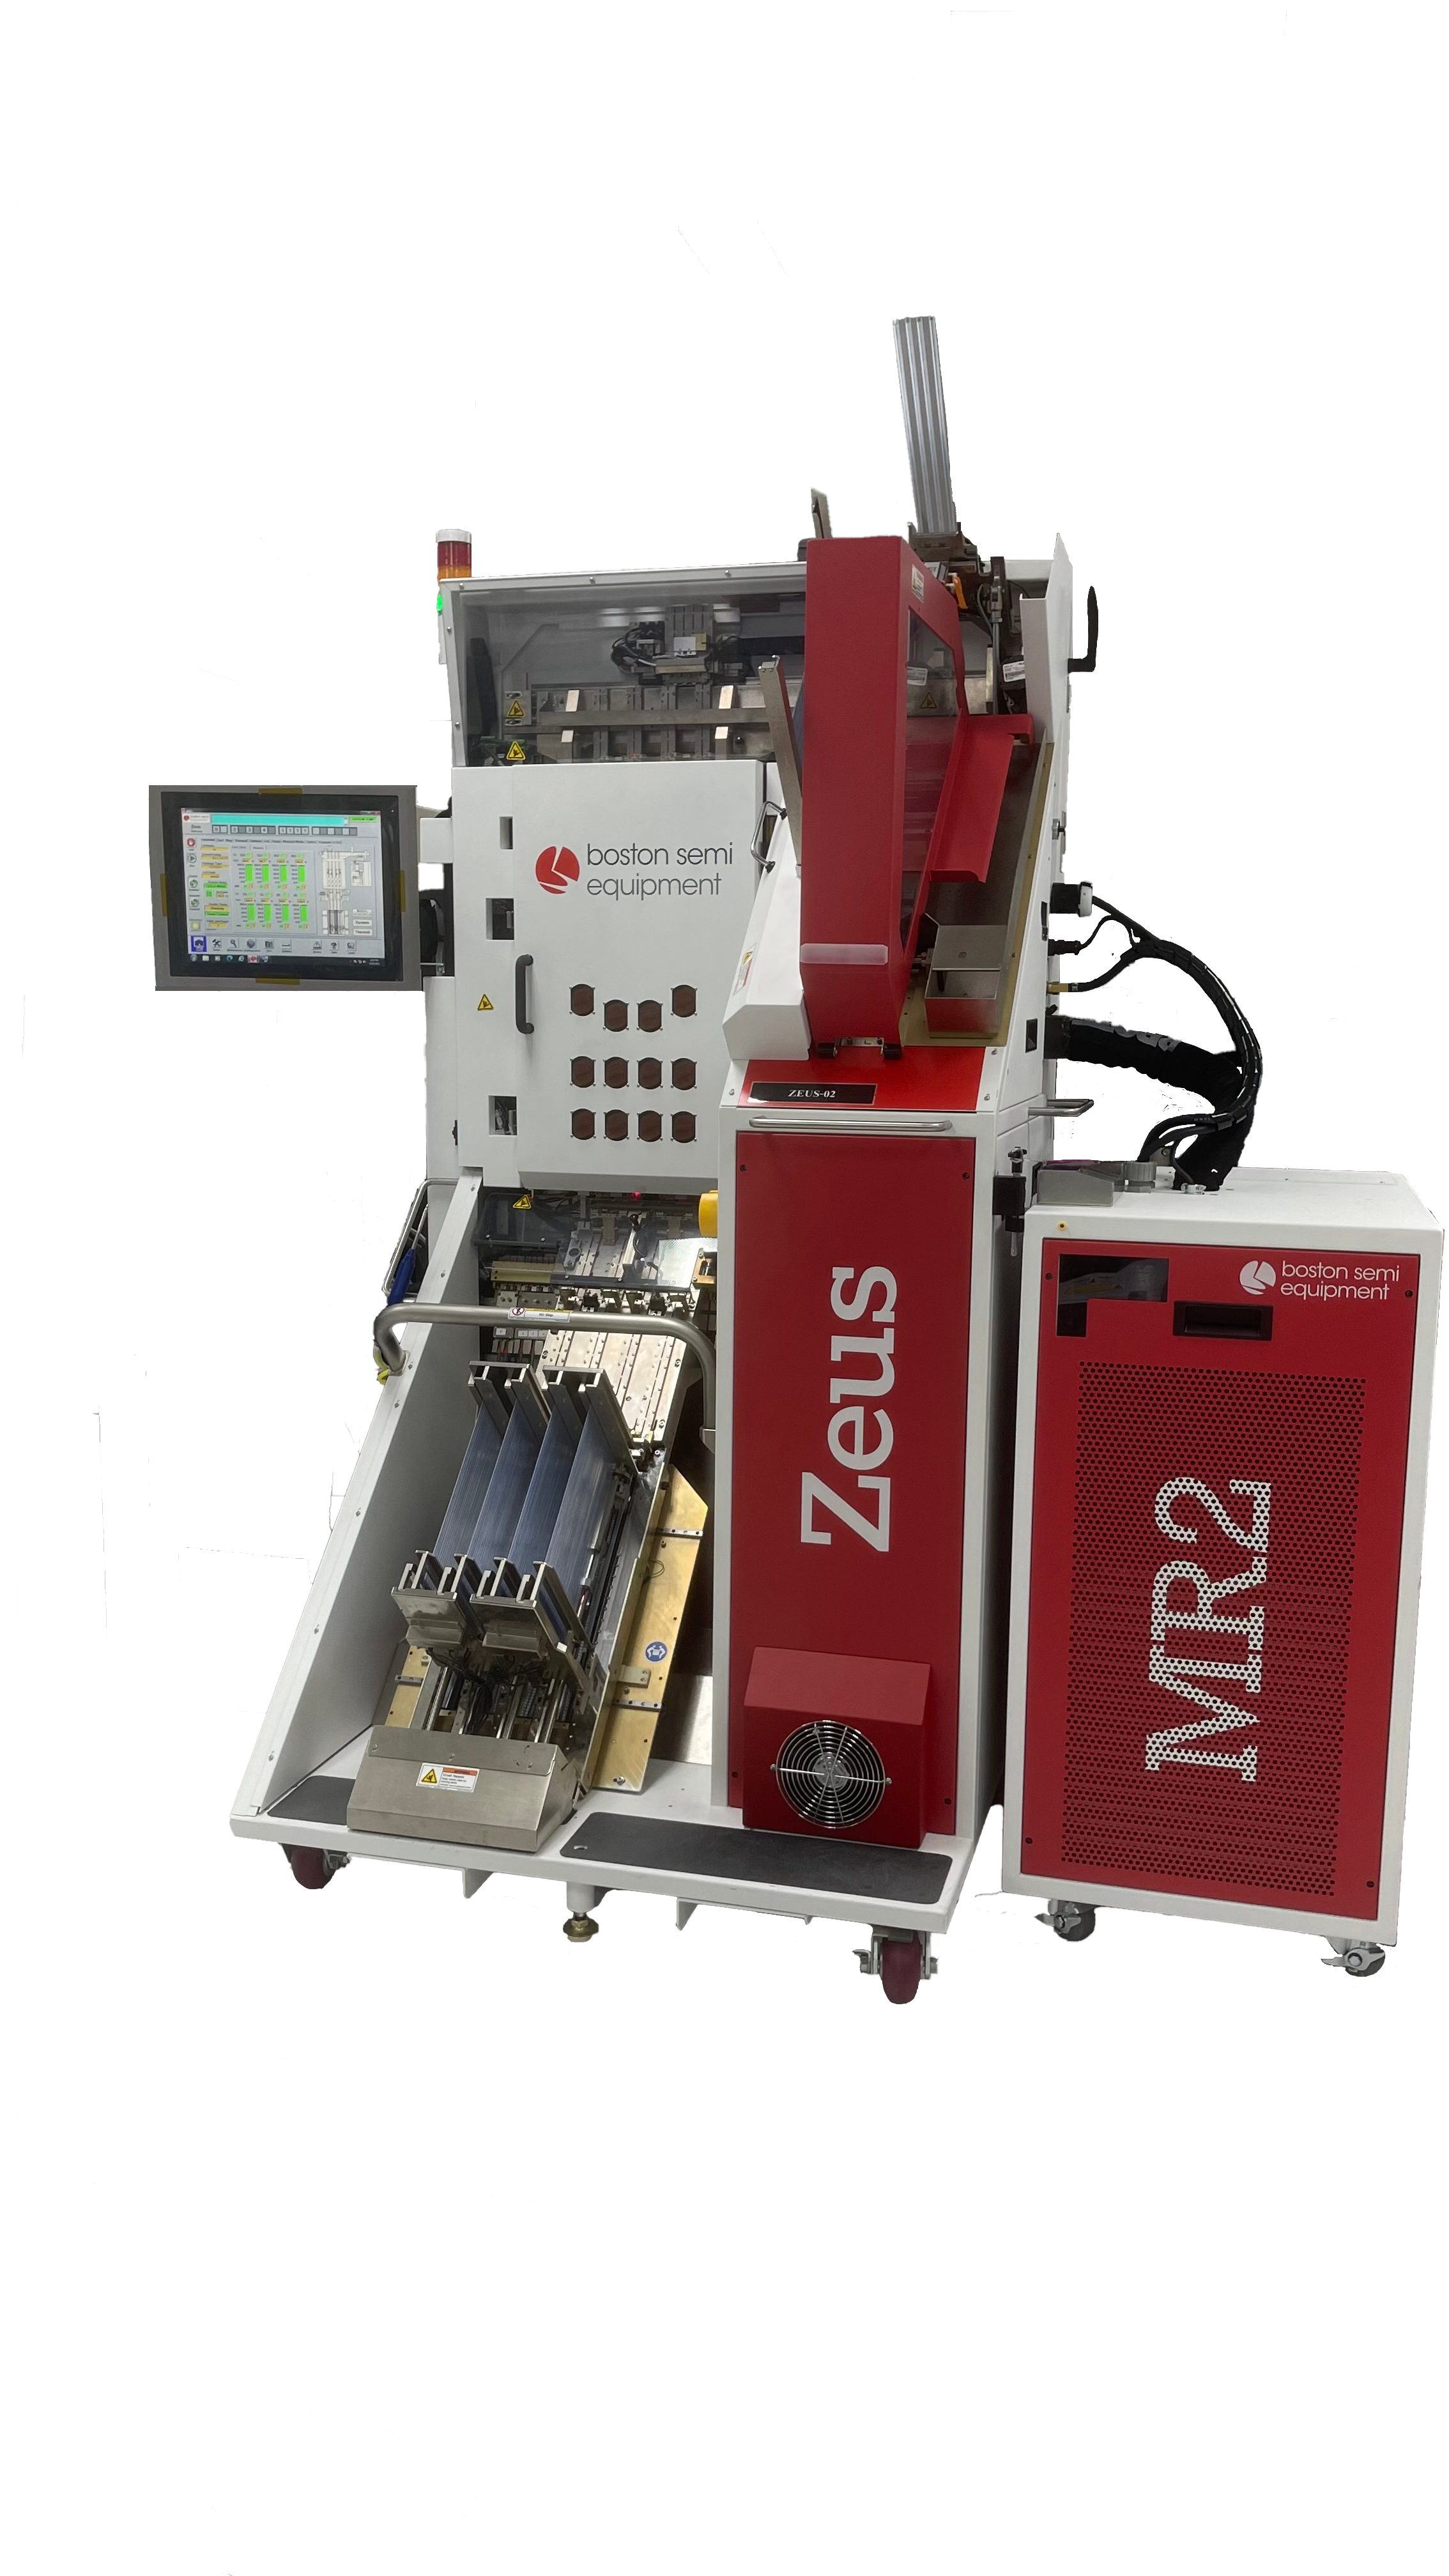 Boston Semi Equipment Launches New Test Site Module for Zeus Test Handler to Support Power IC Manufacturers